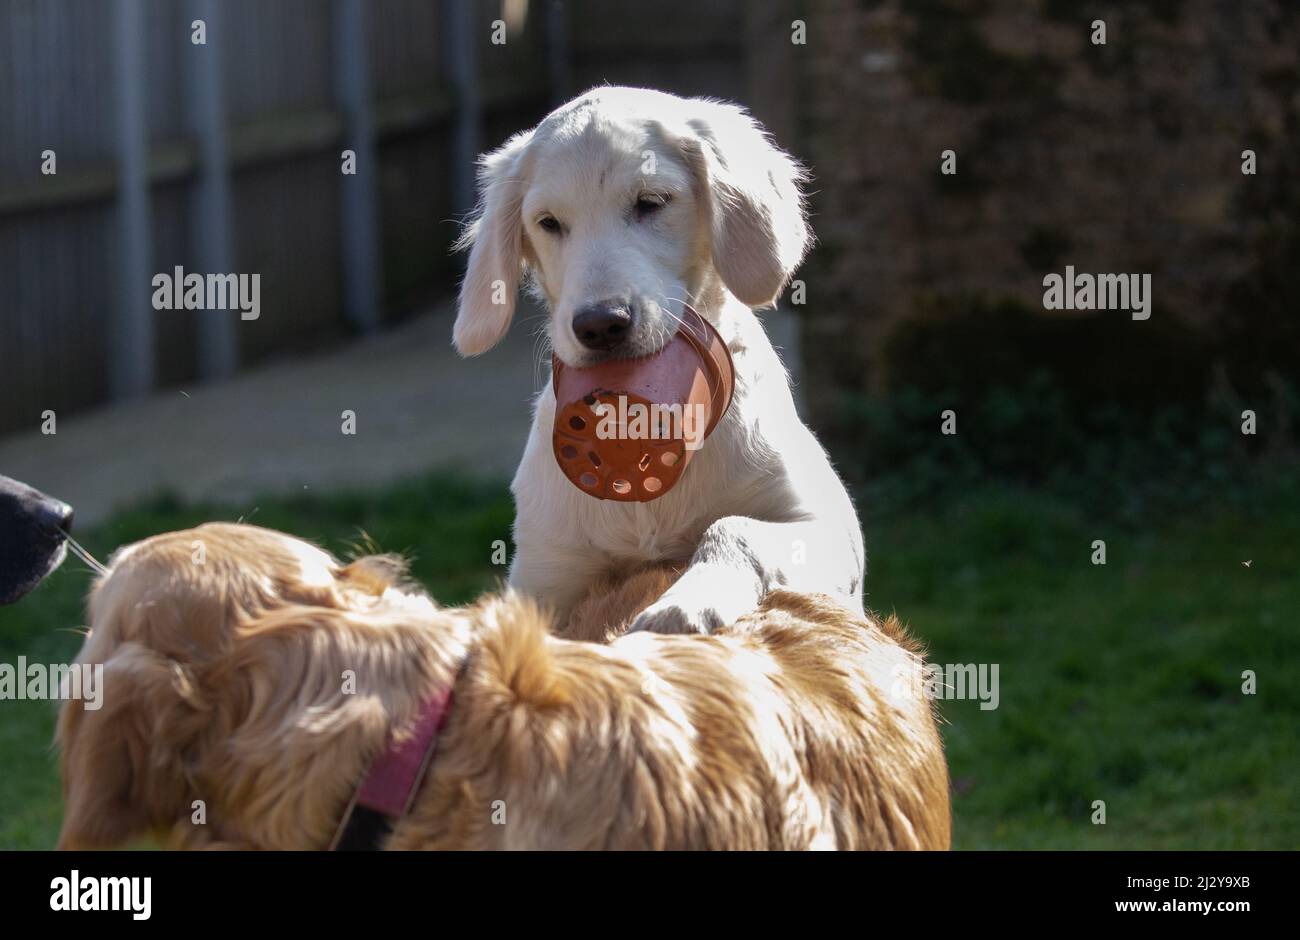 A Golden Retriever puppy holding a plastic plant pot. The puppy is jumping on an adult retriever wanting to play. Stock Photo